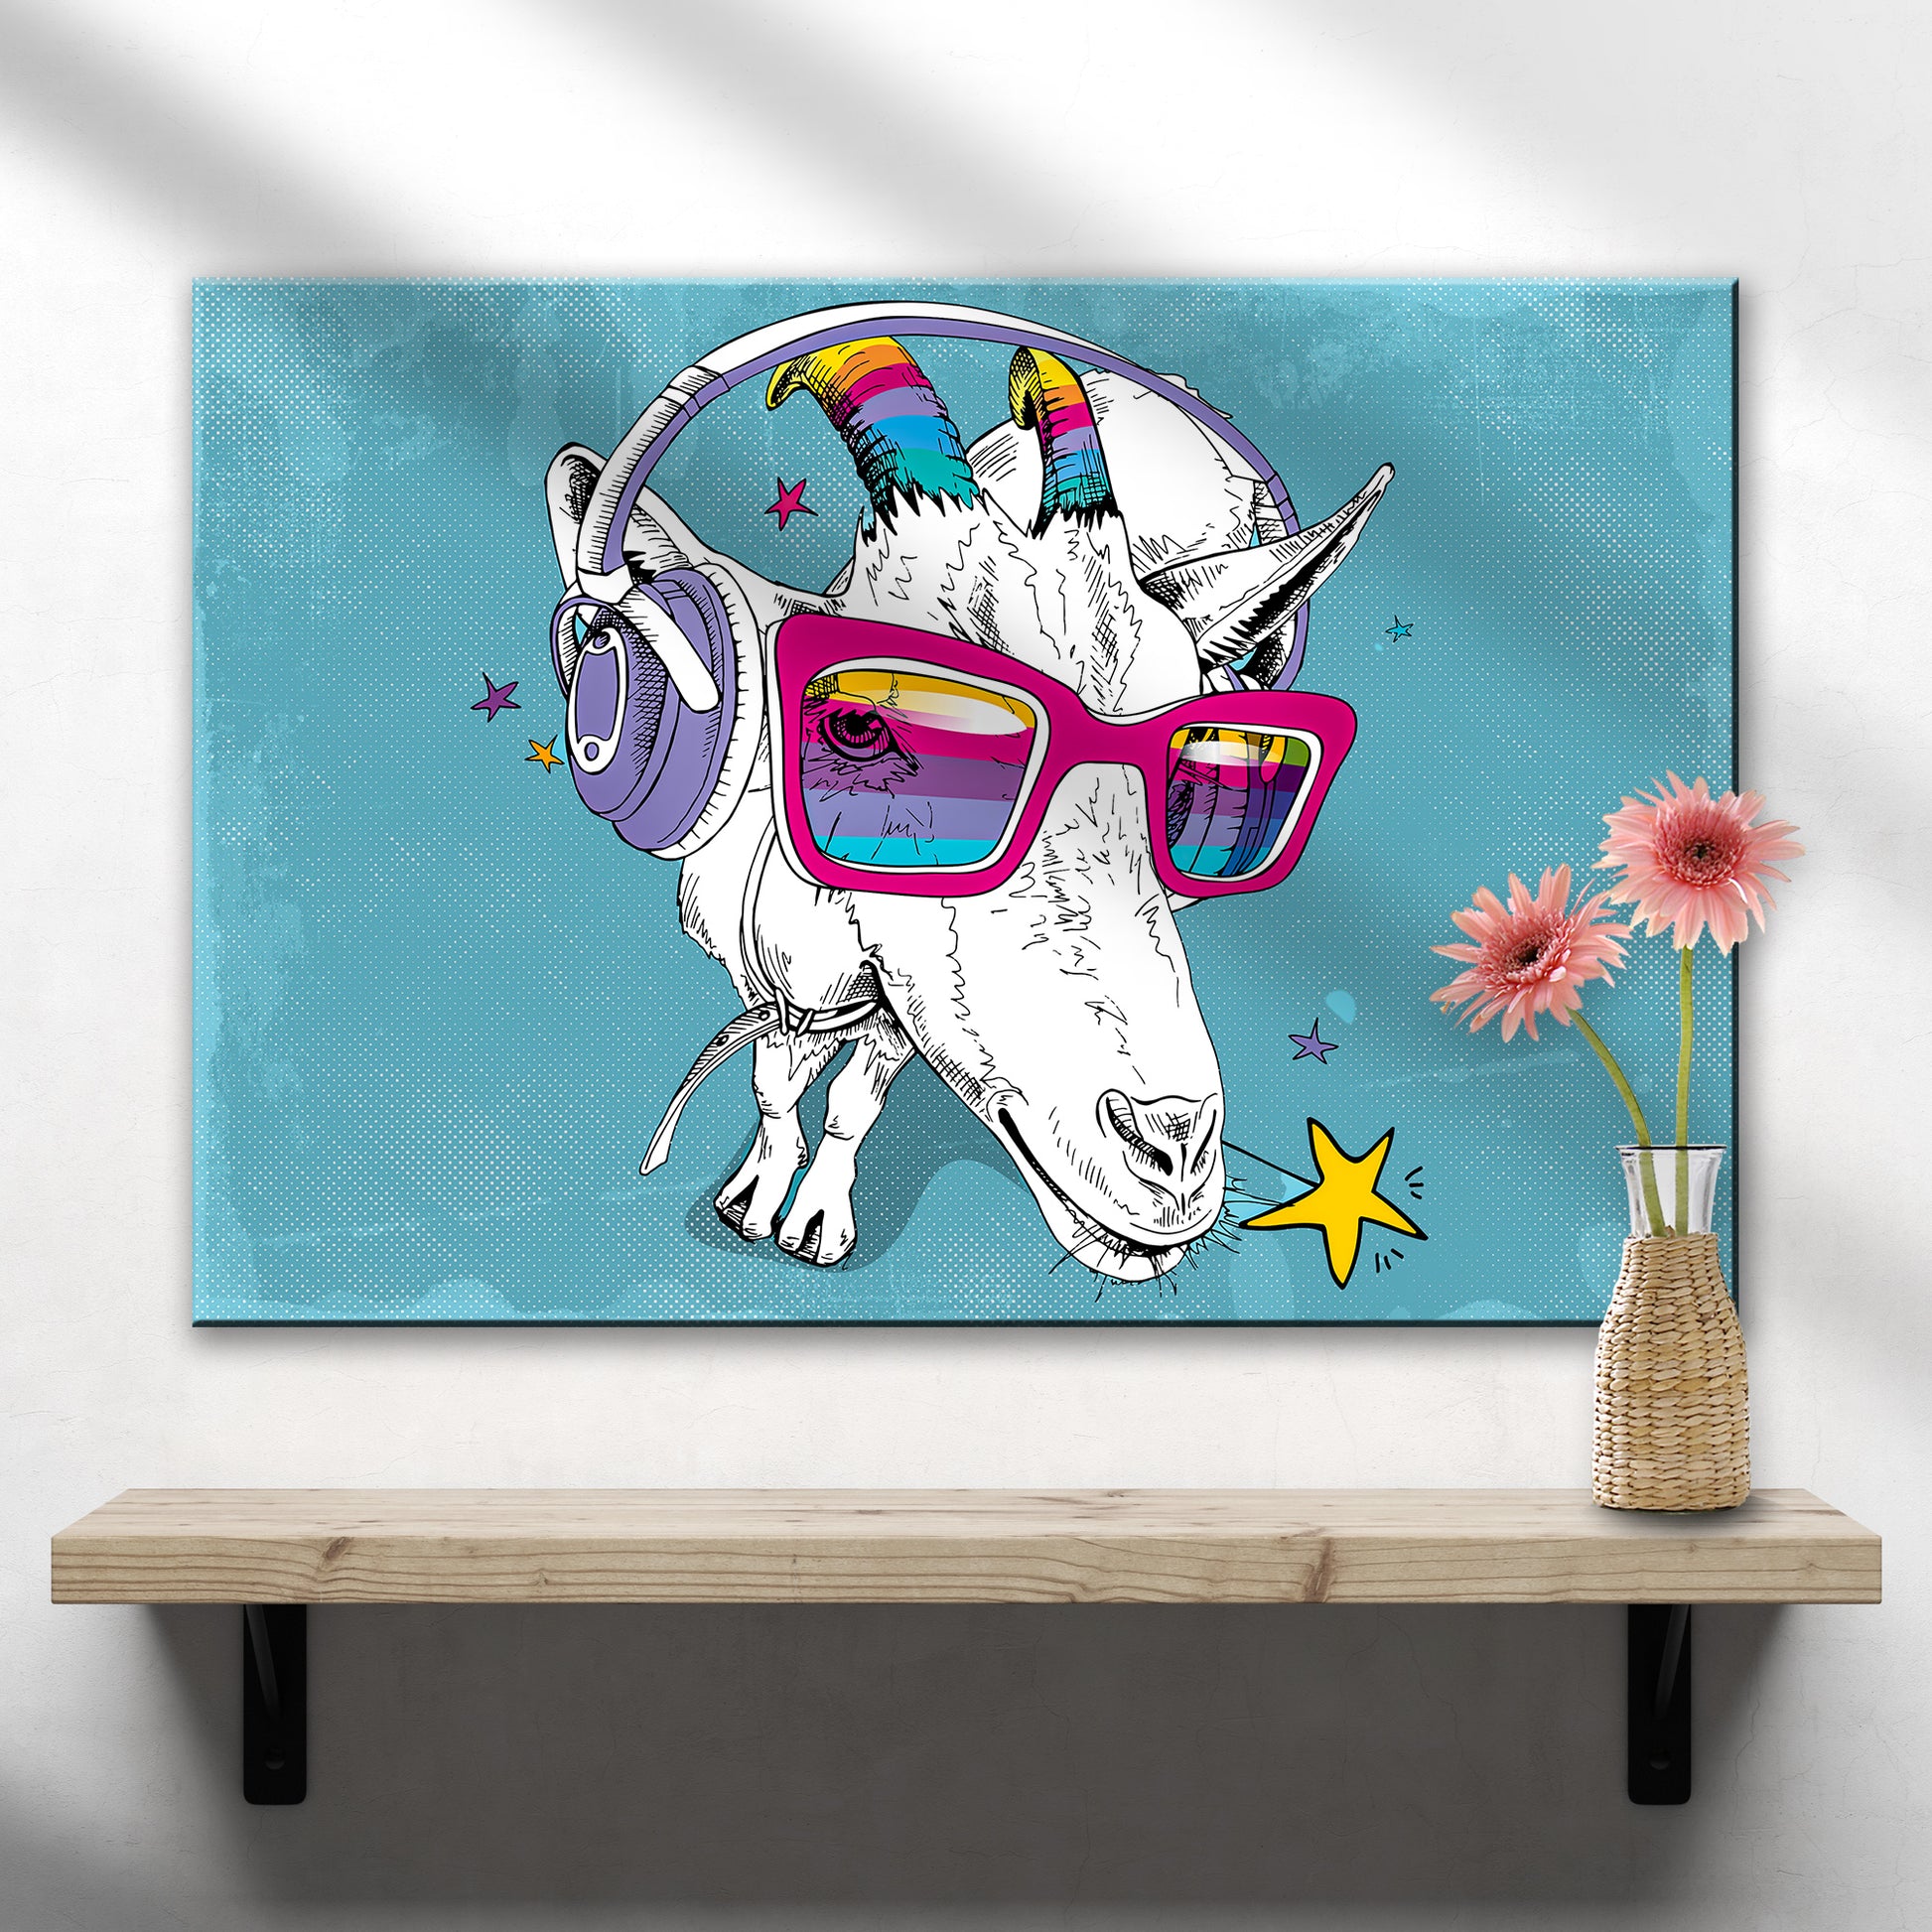 Rainbow Cool Goat Canvas Wall Art - Image by Tailored Canvases